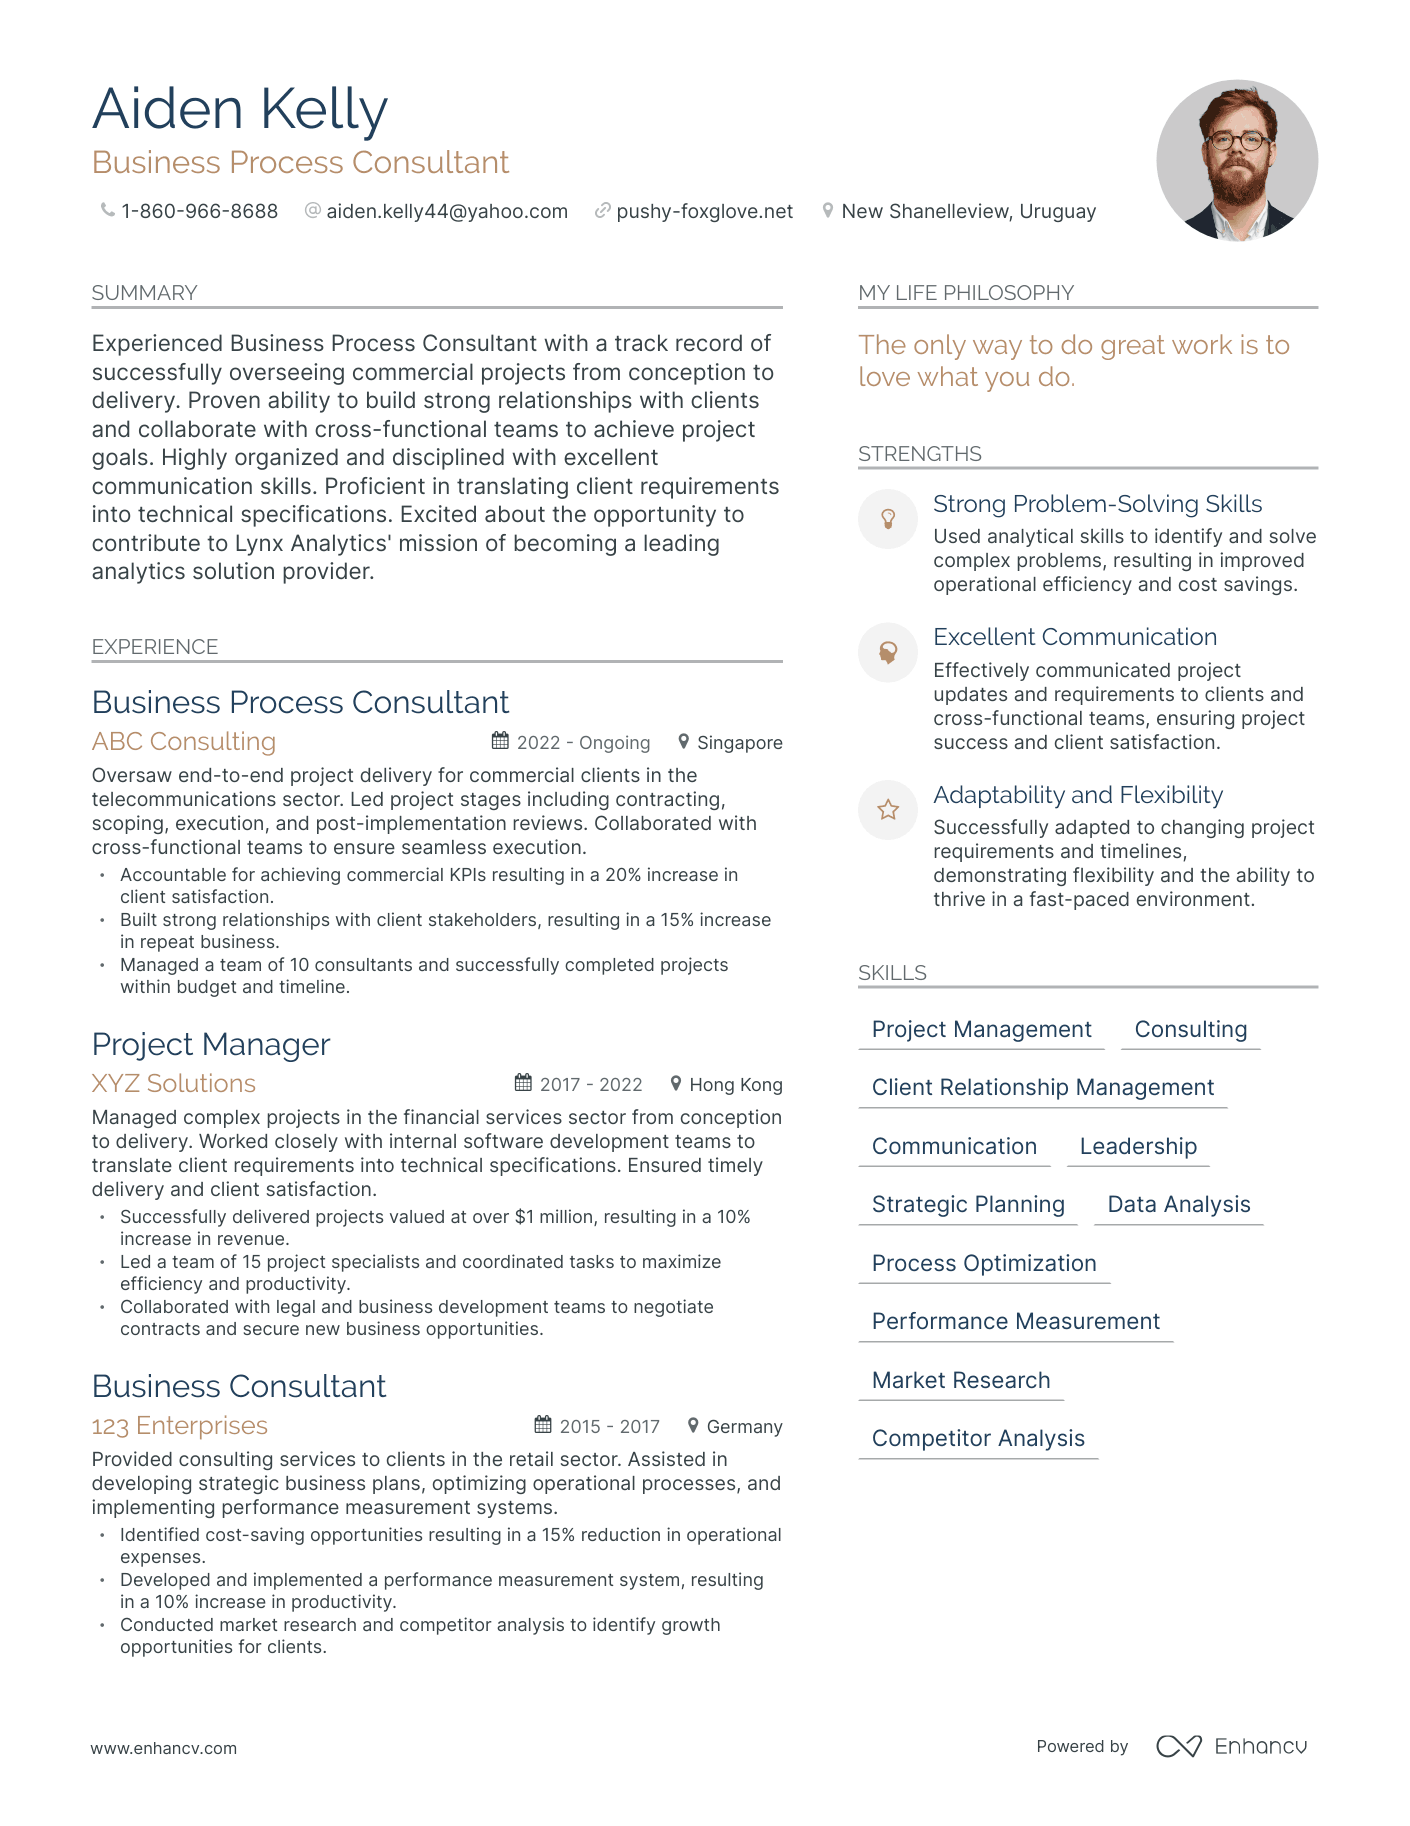 Business Process Consultant resume example